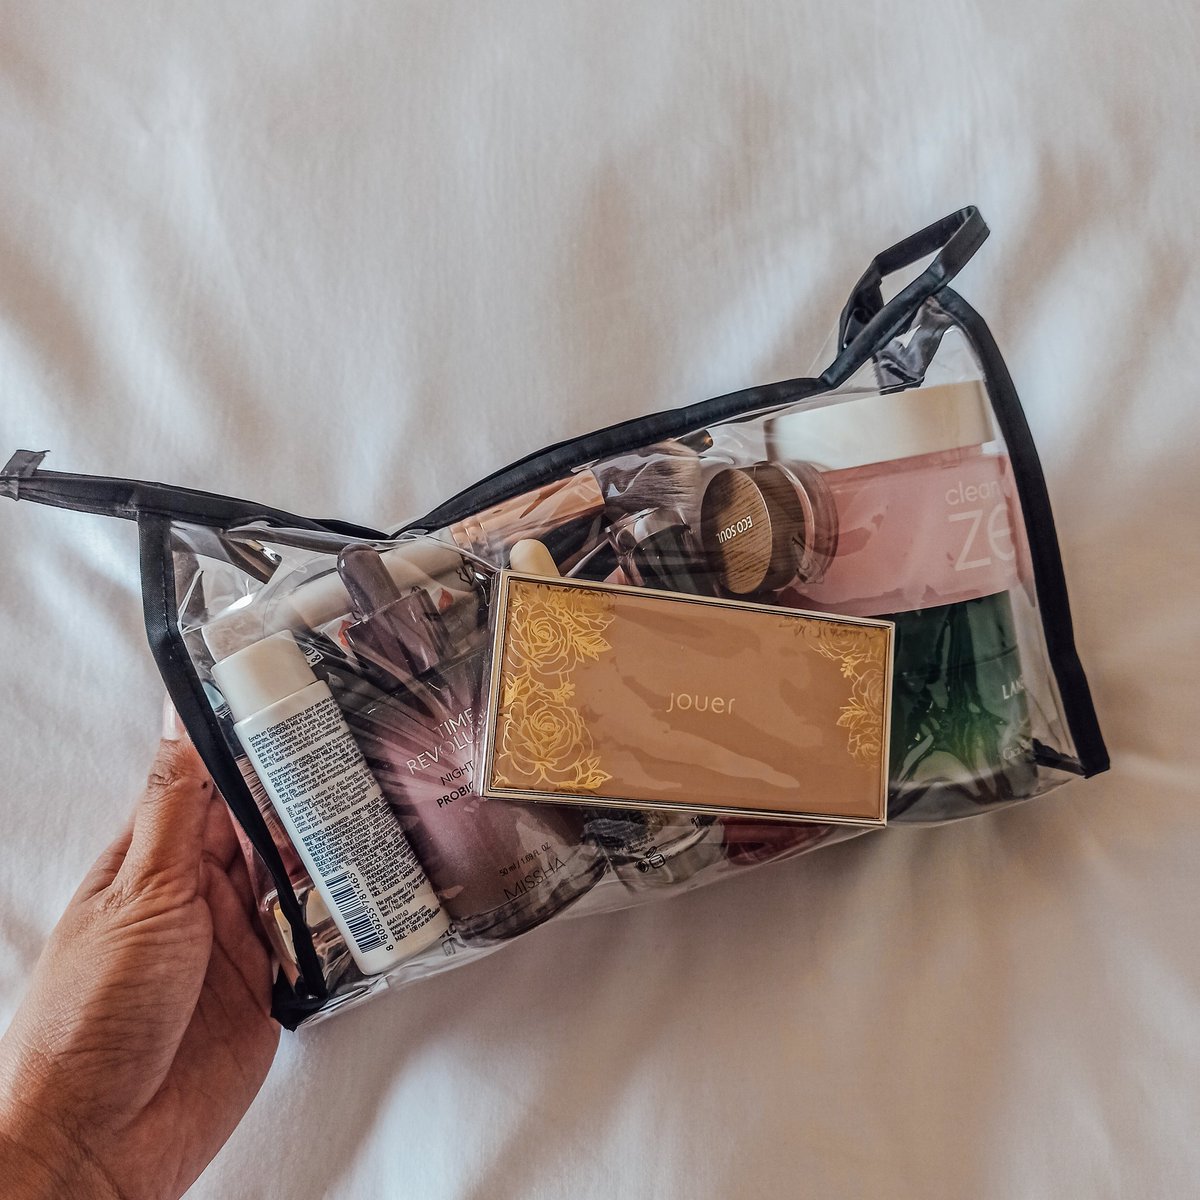 Travel skincare + makeup. In one bag 